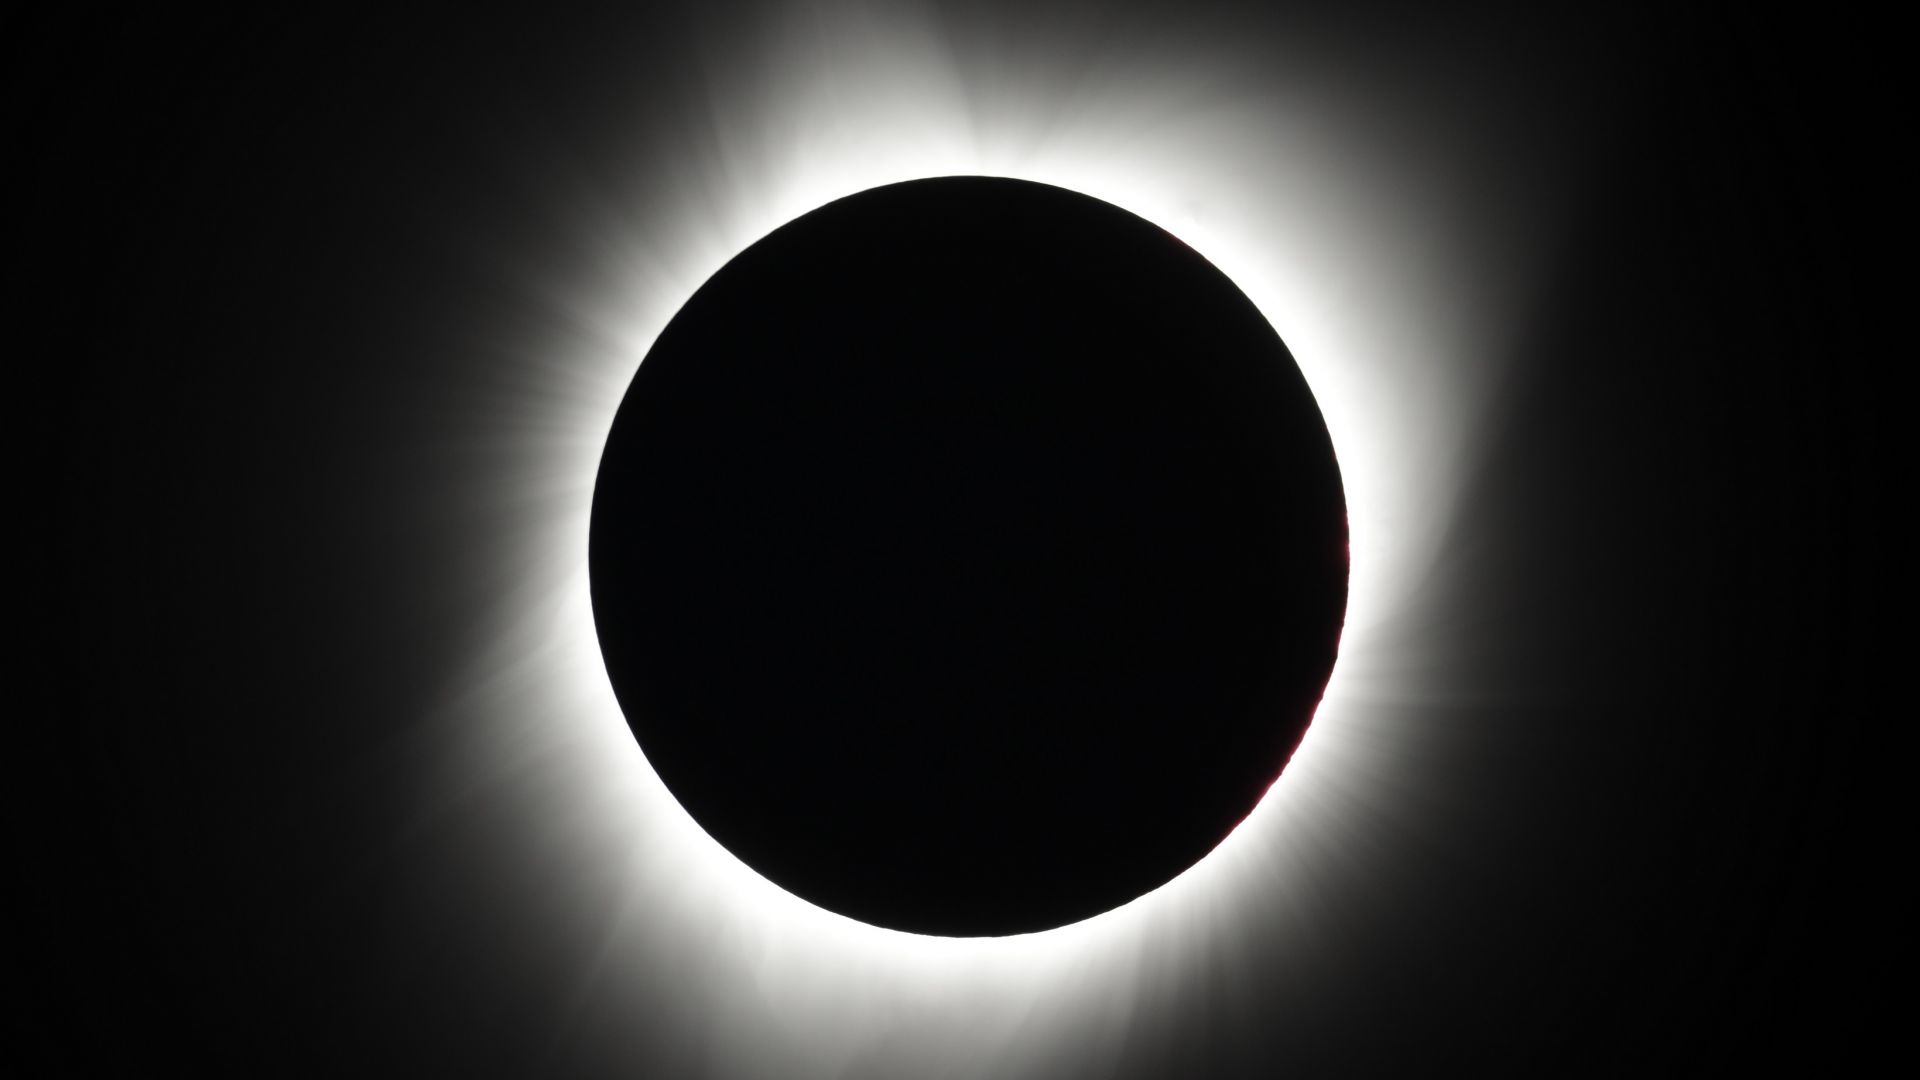 Total solar eclipse of Aug 21 2017, Great American eclipse, 4k (horizontal)